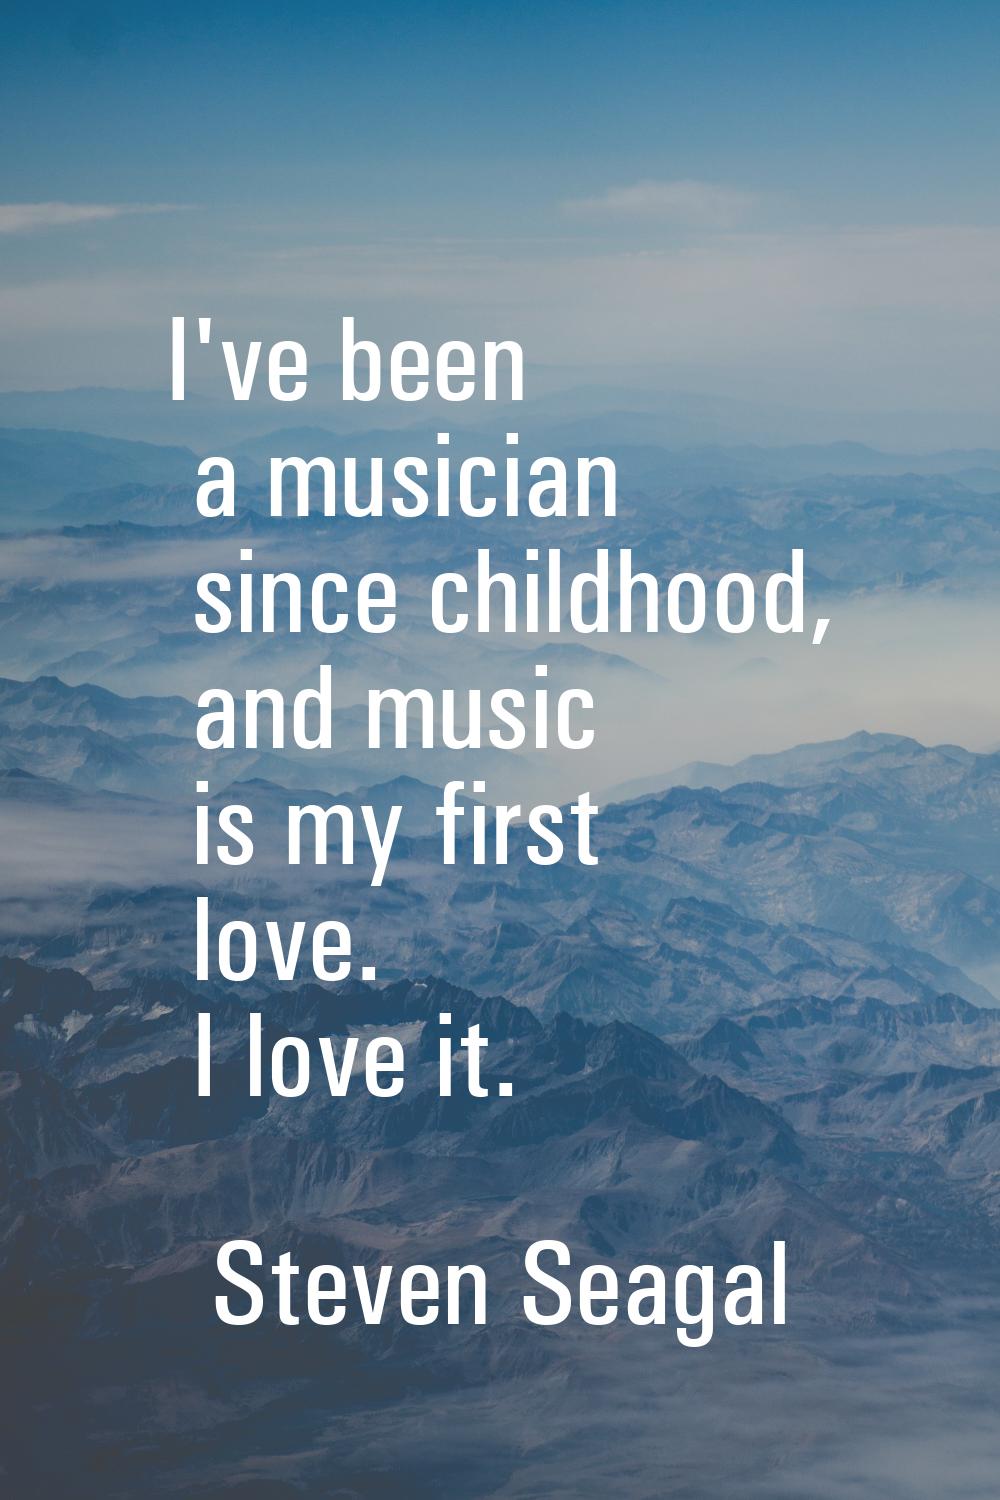 I've been a musician since childhood, and music is my first love. I love it.